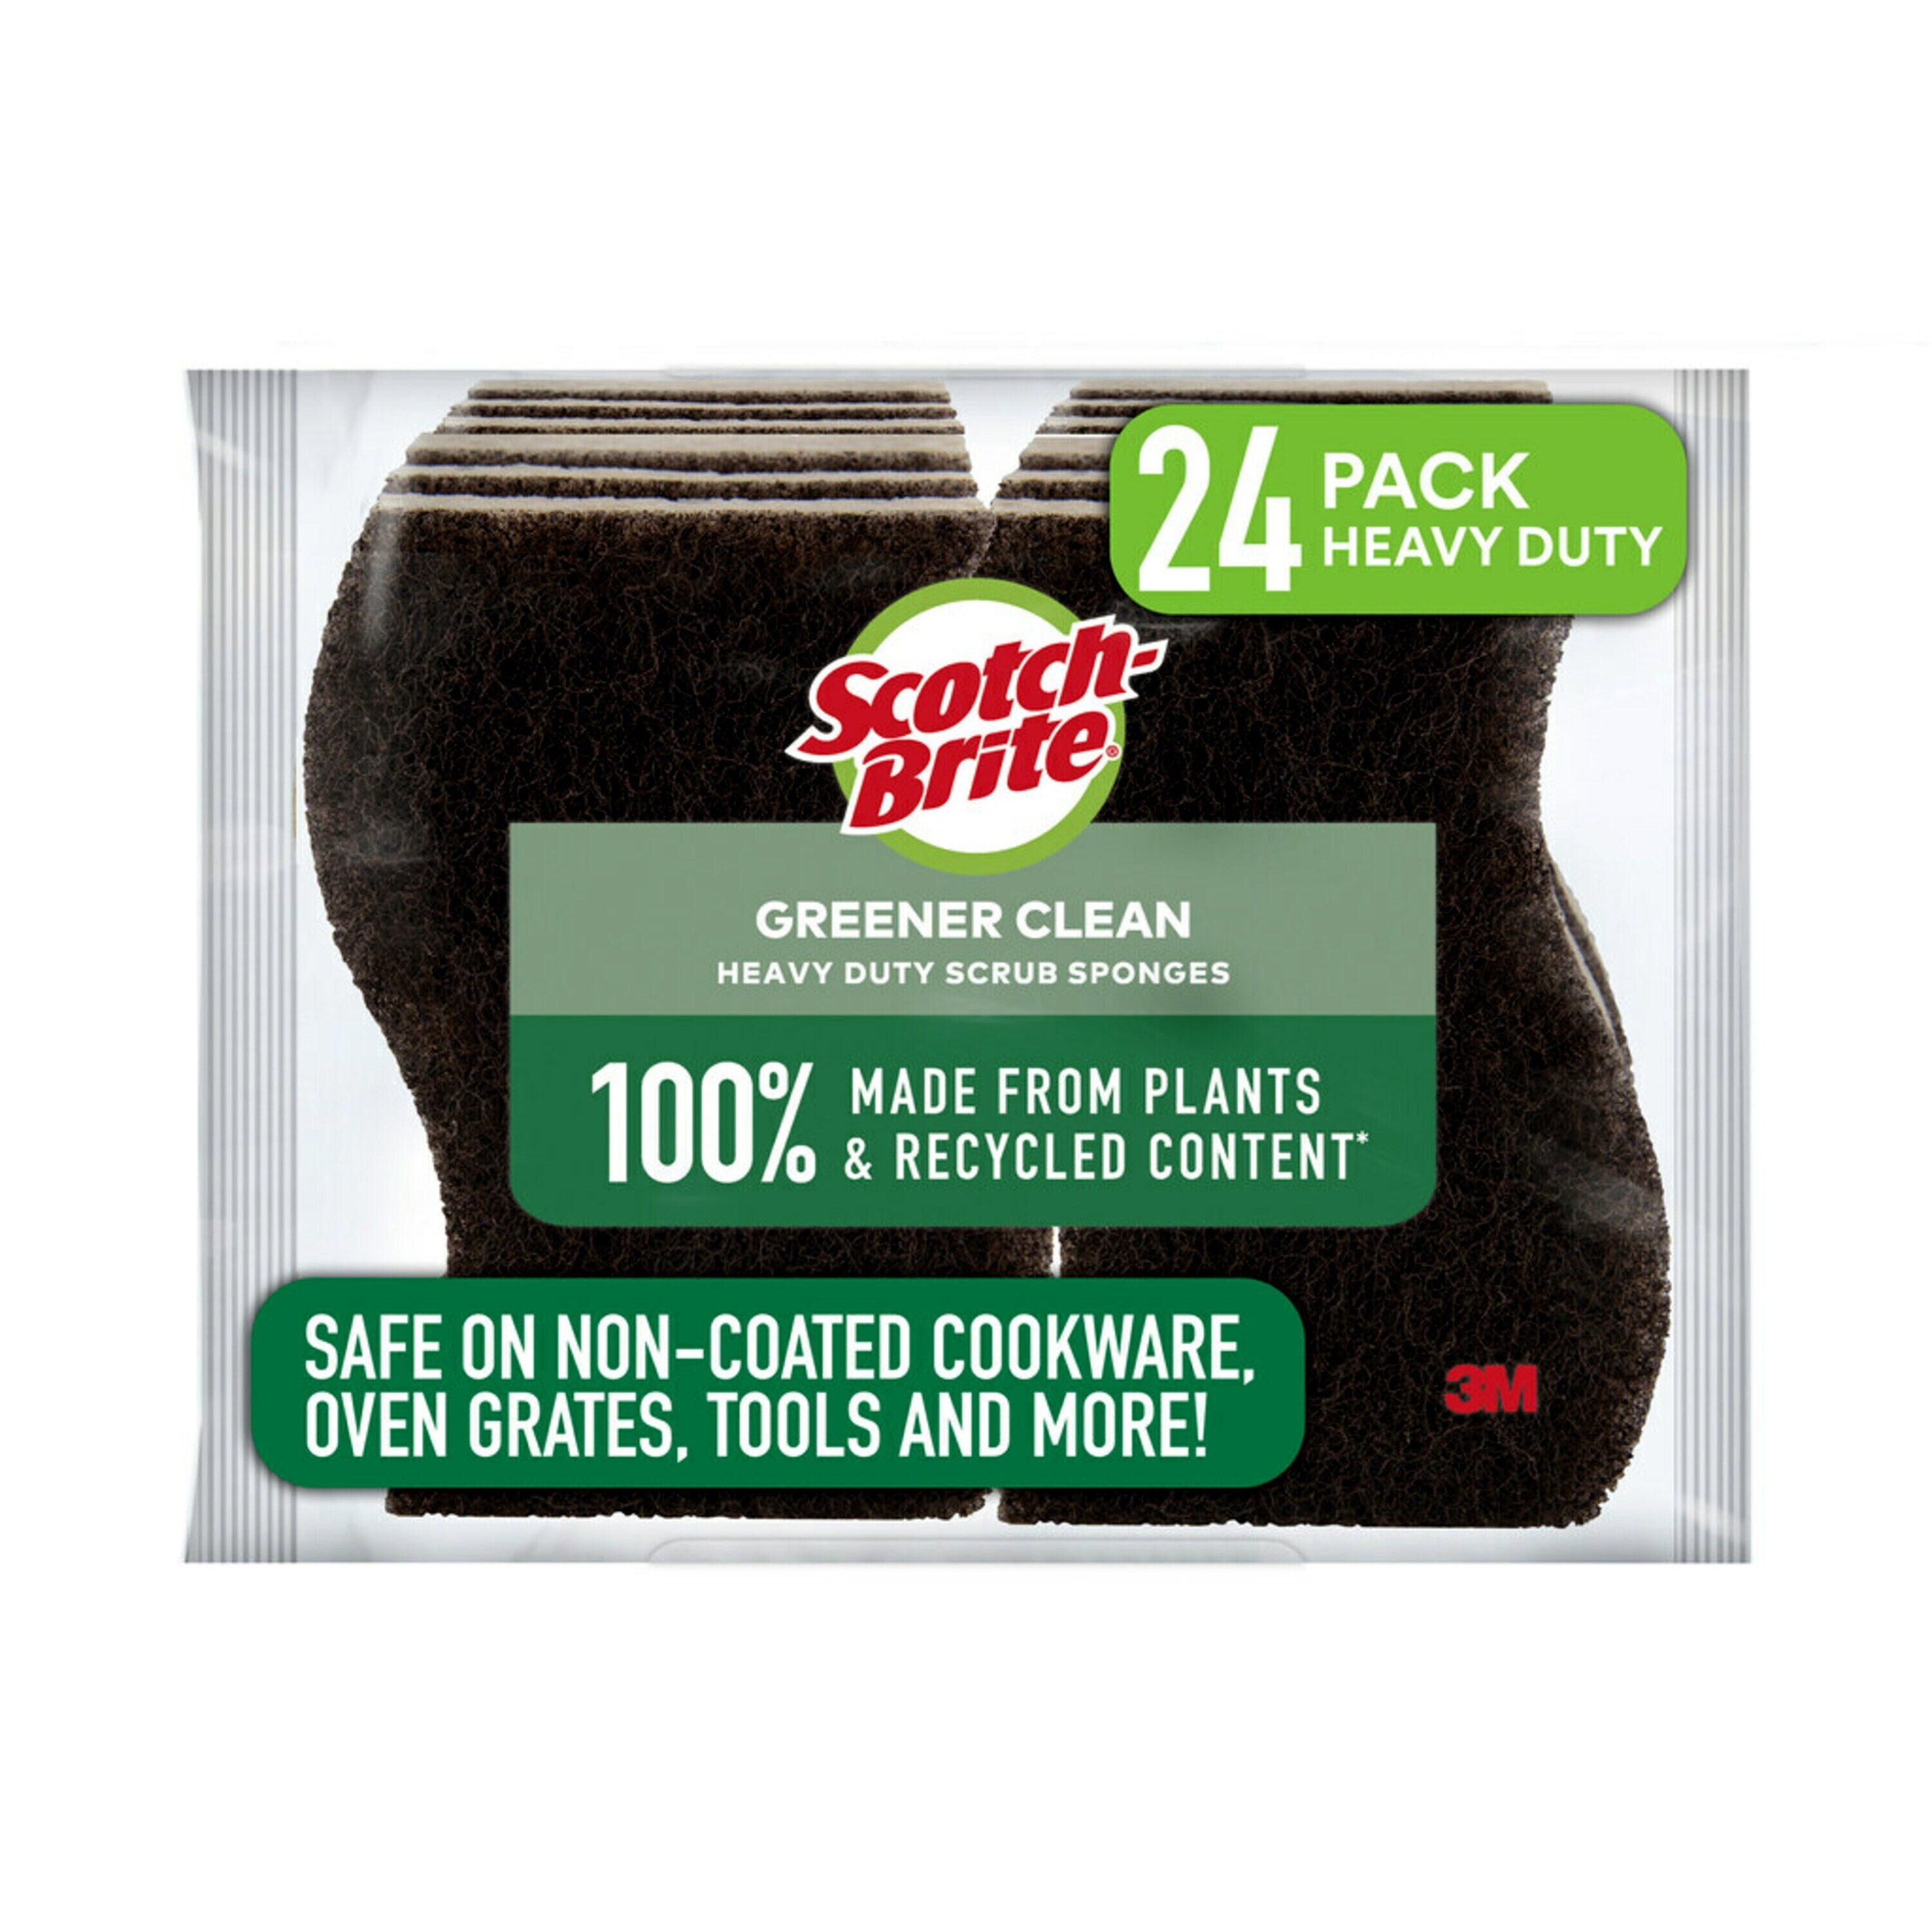 Scotch-Brite Heavy Duty Scrub Sponges, Sponges for Cleaning Kitchen and  Household, Heavy Duty Sponges Safe for Non-Coated Cookware, 9 Scrubbing  Sponges 9 Scrub Sponges